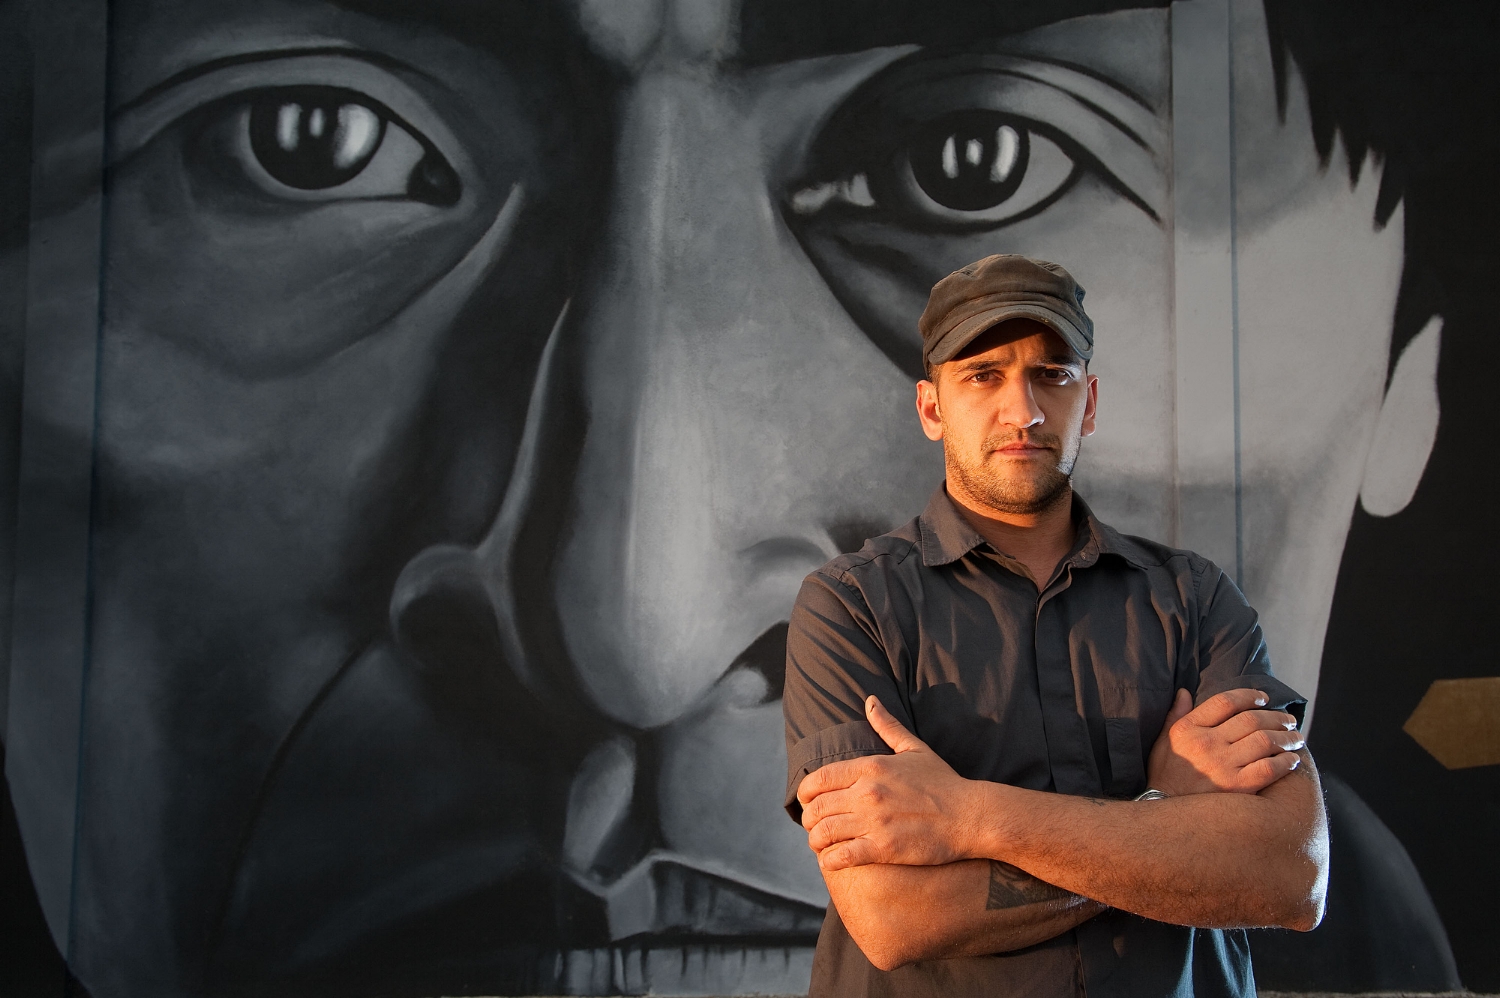  Mural artist Alex Forster stands in front of his artwork at 24th Street and Broadway in Sacramento on Monday, April18, 2011. 